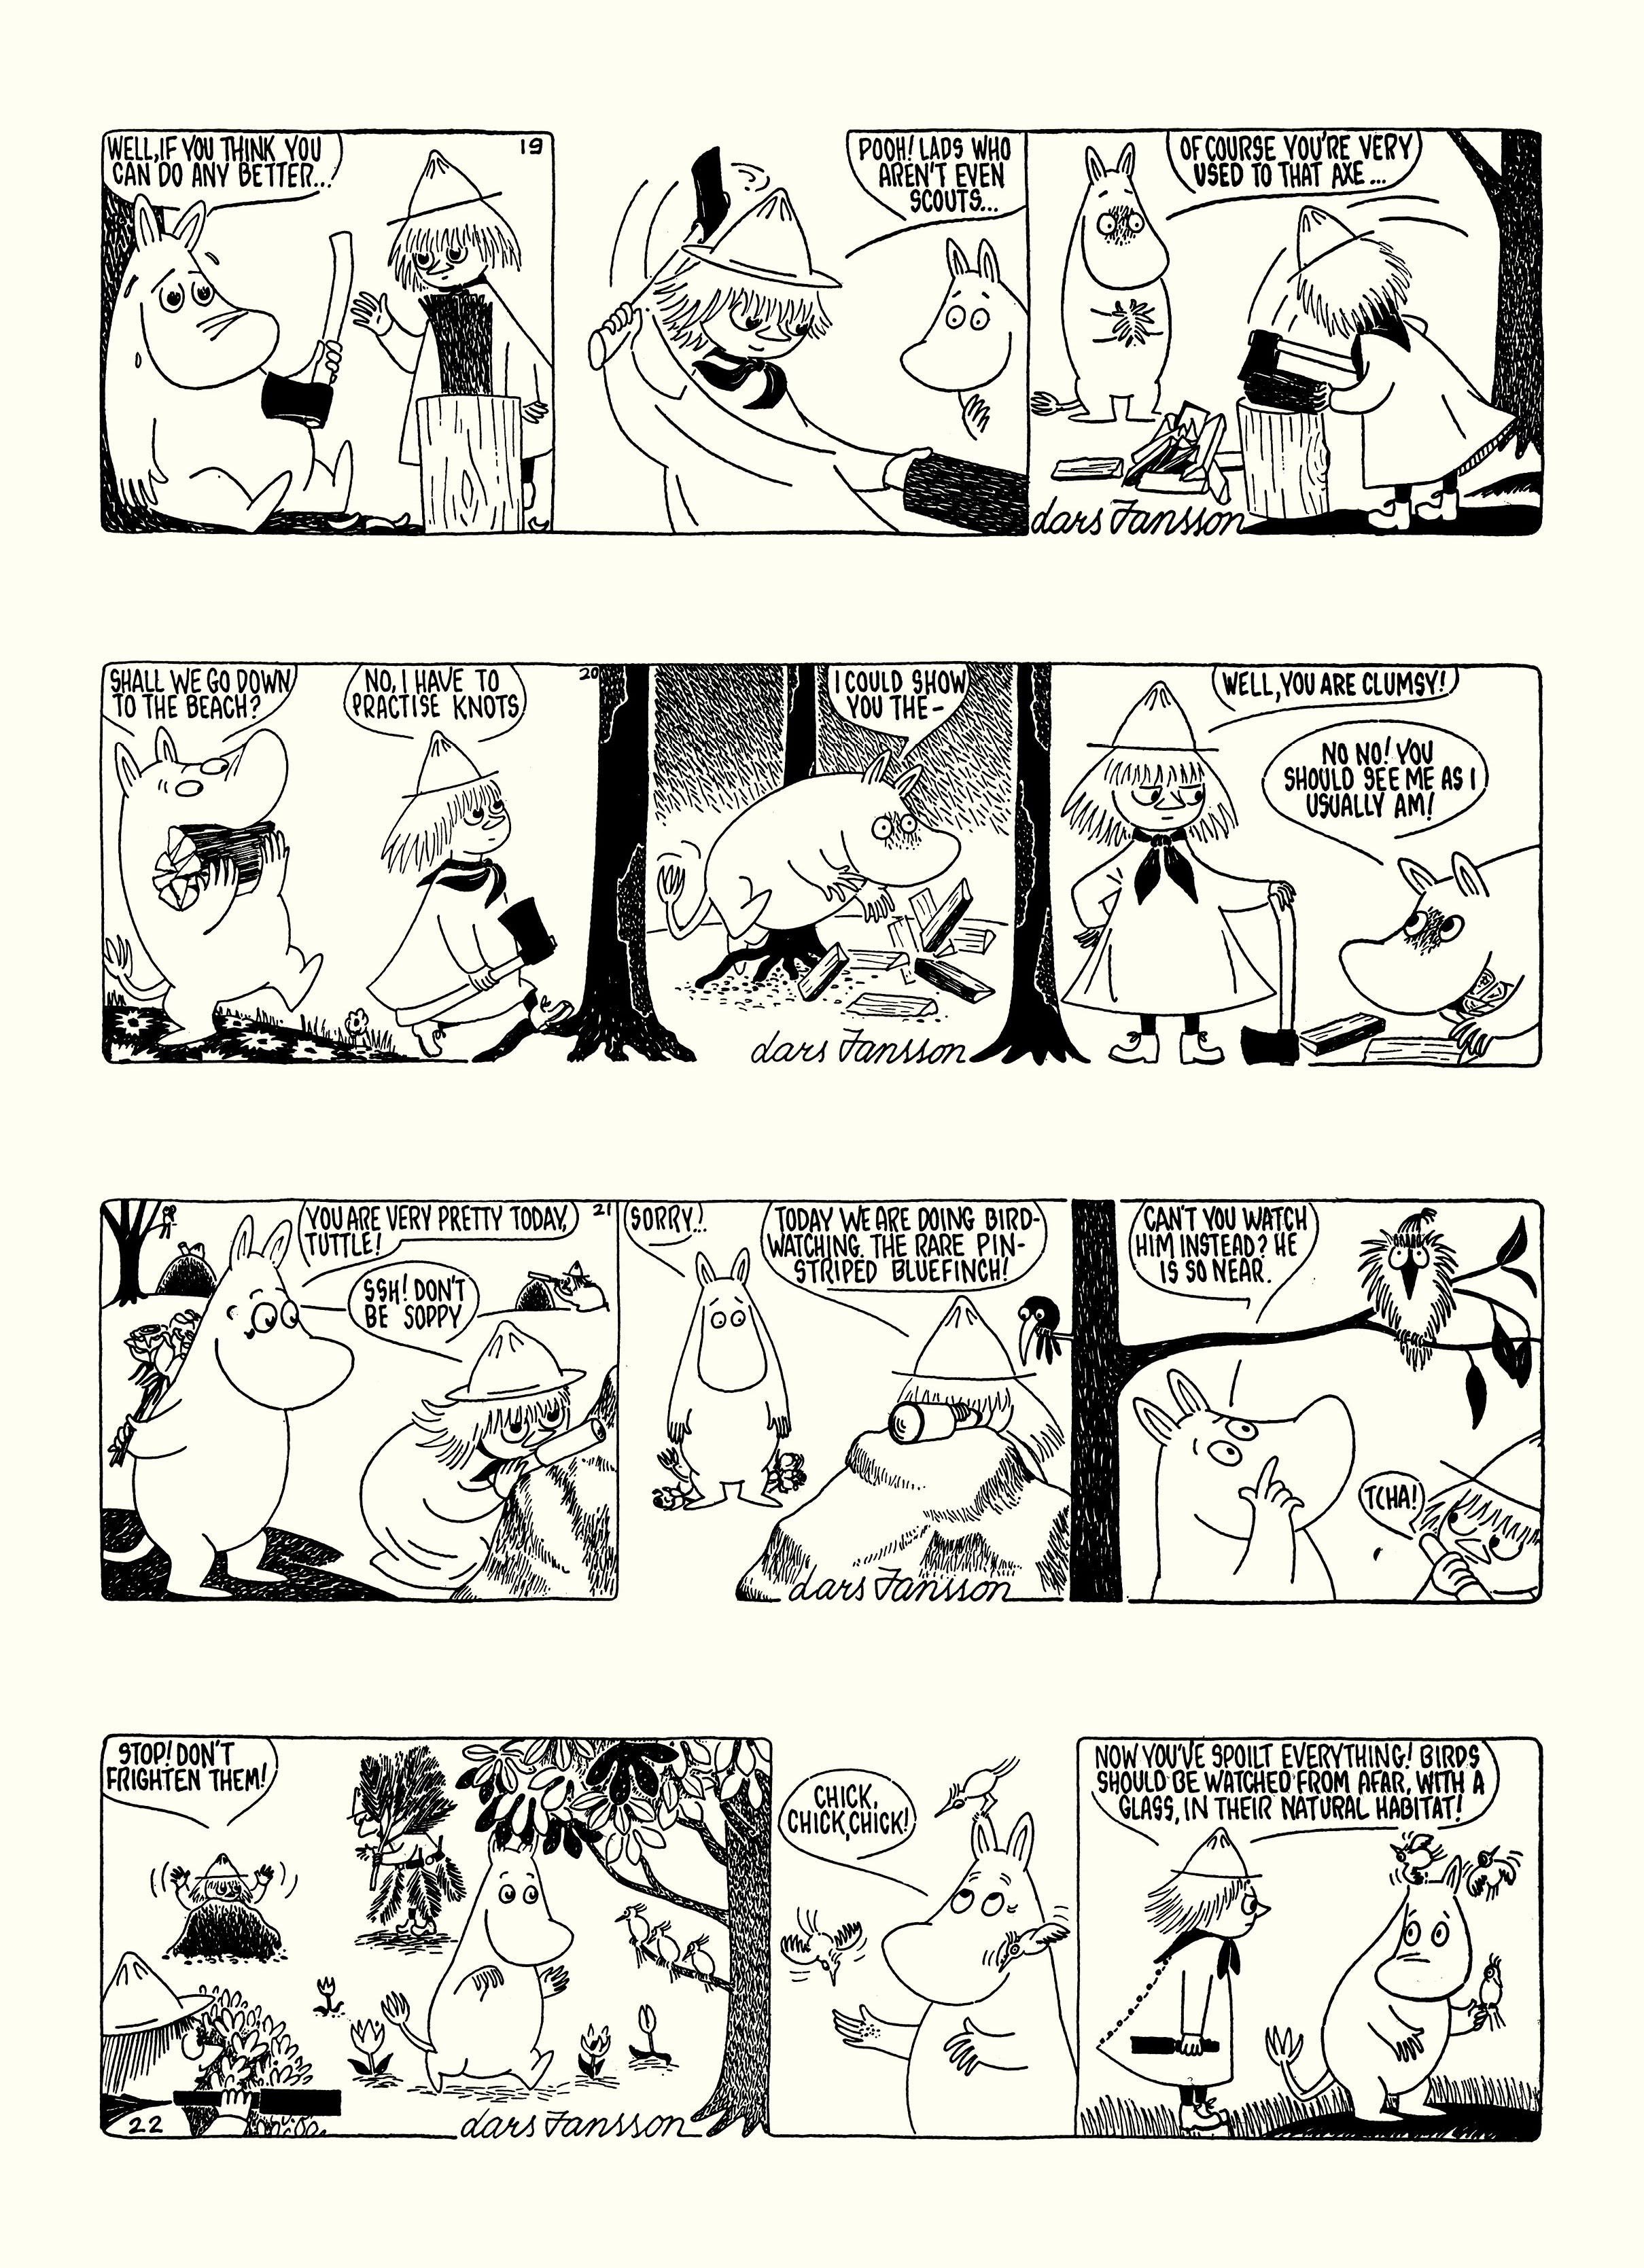 Read online Moomin: The Complete Lars Jansson Comic Strip comic -  Issue # TPB 7 - 32